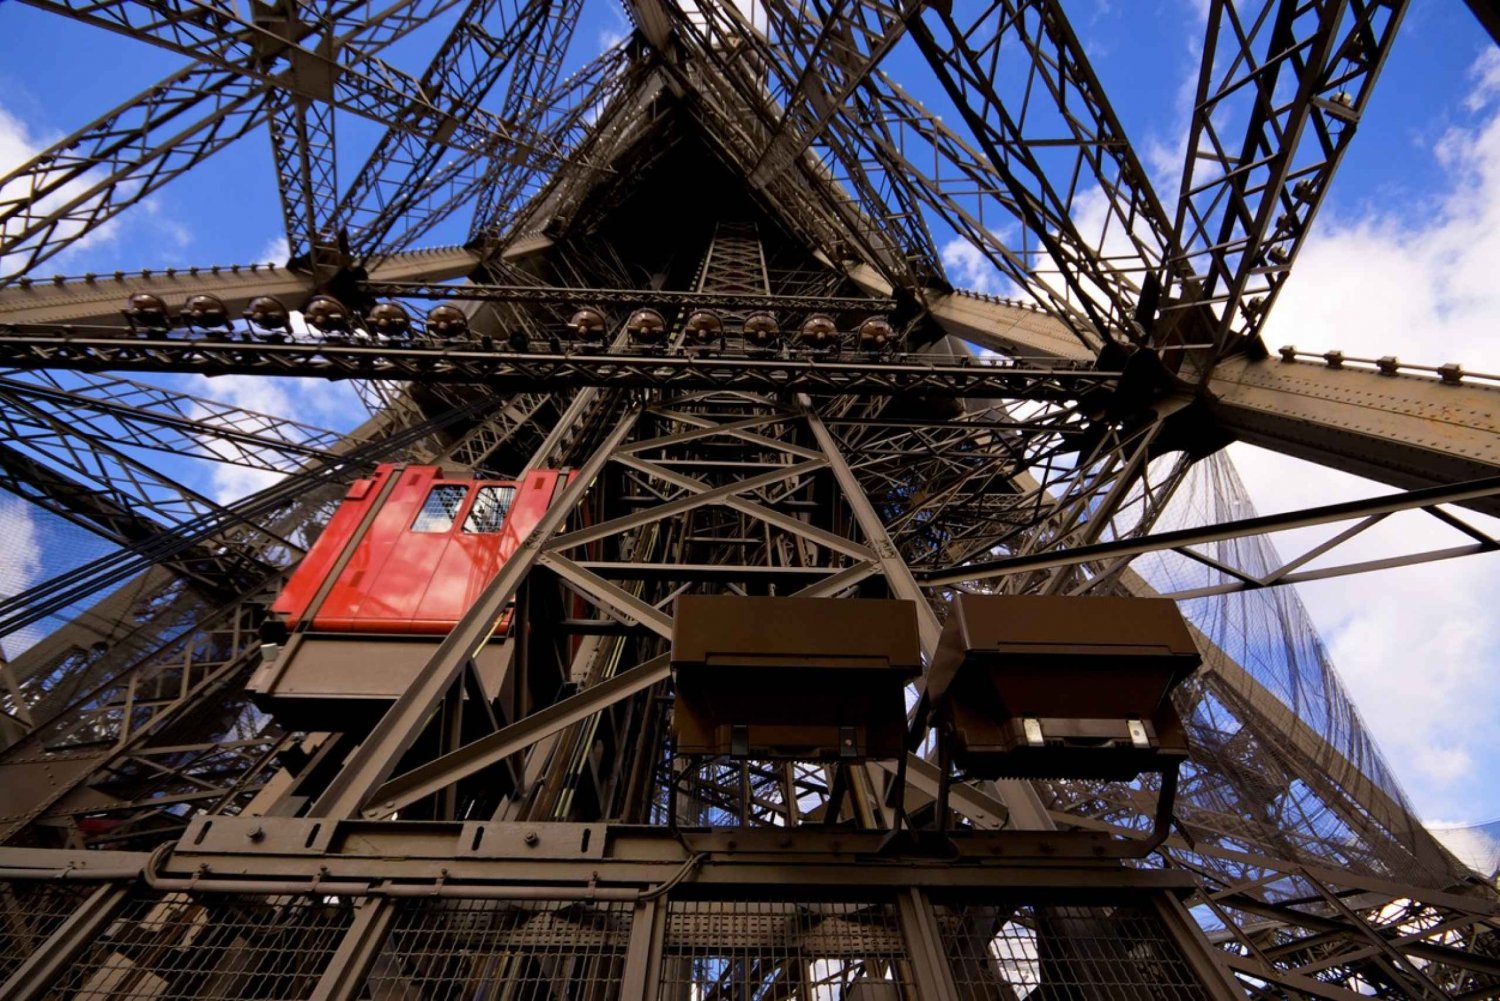 Paris: Access to the Eiffel Tower's 2nd Floor